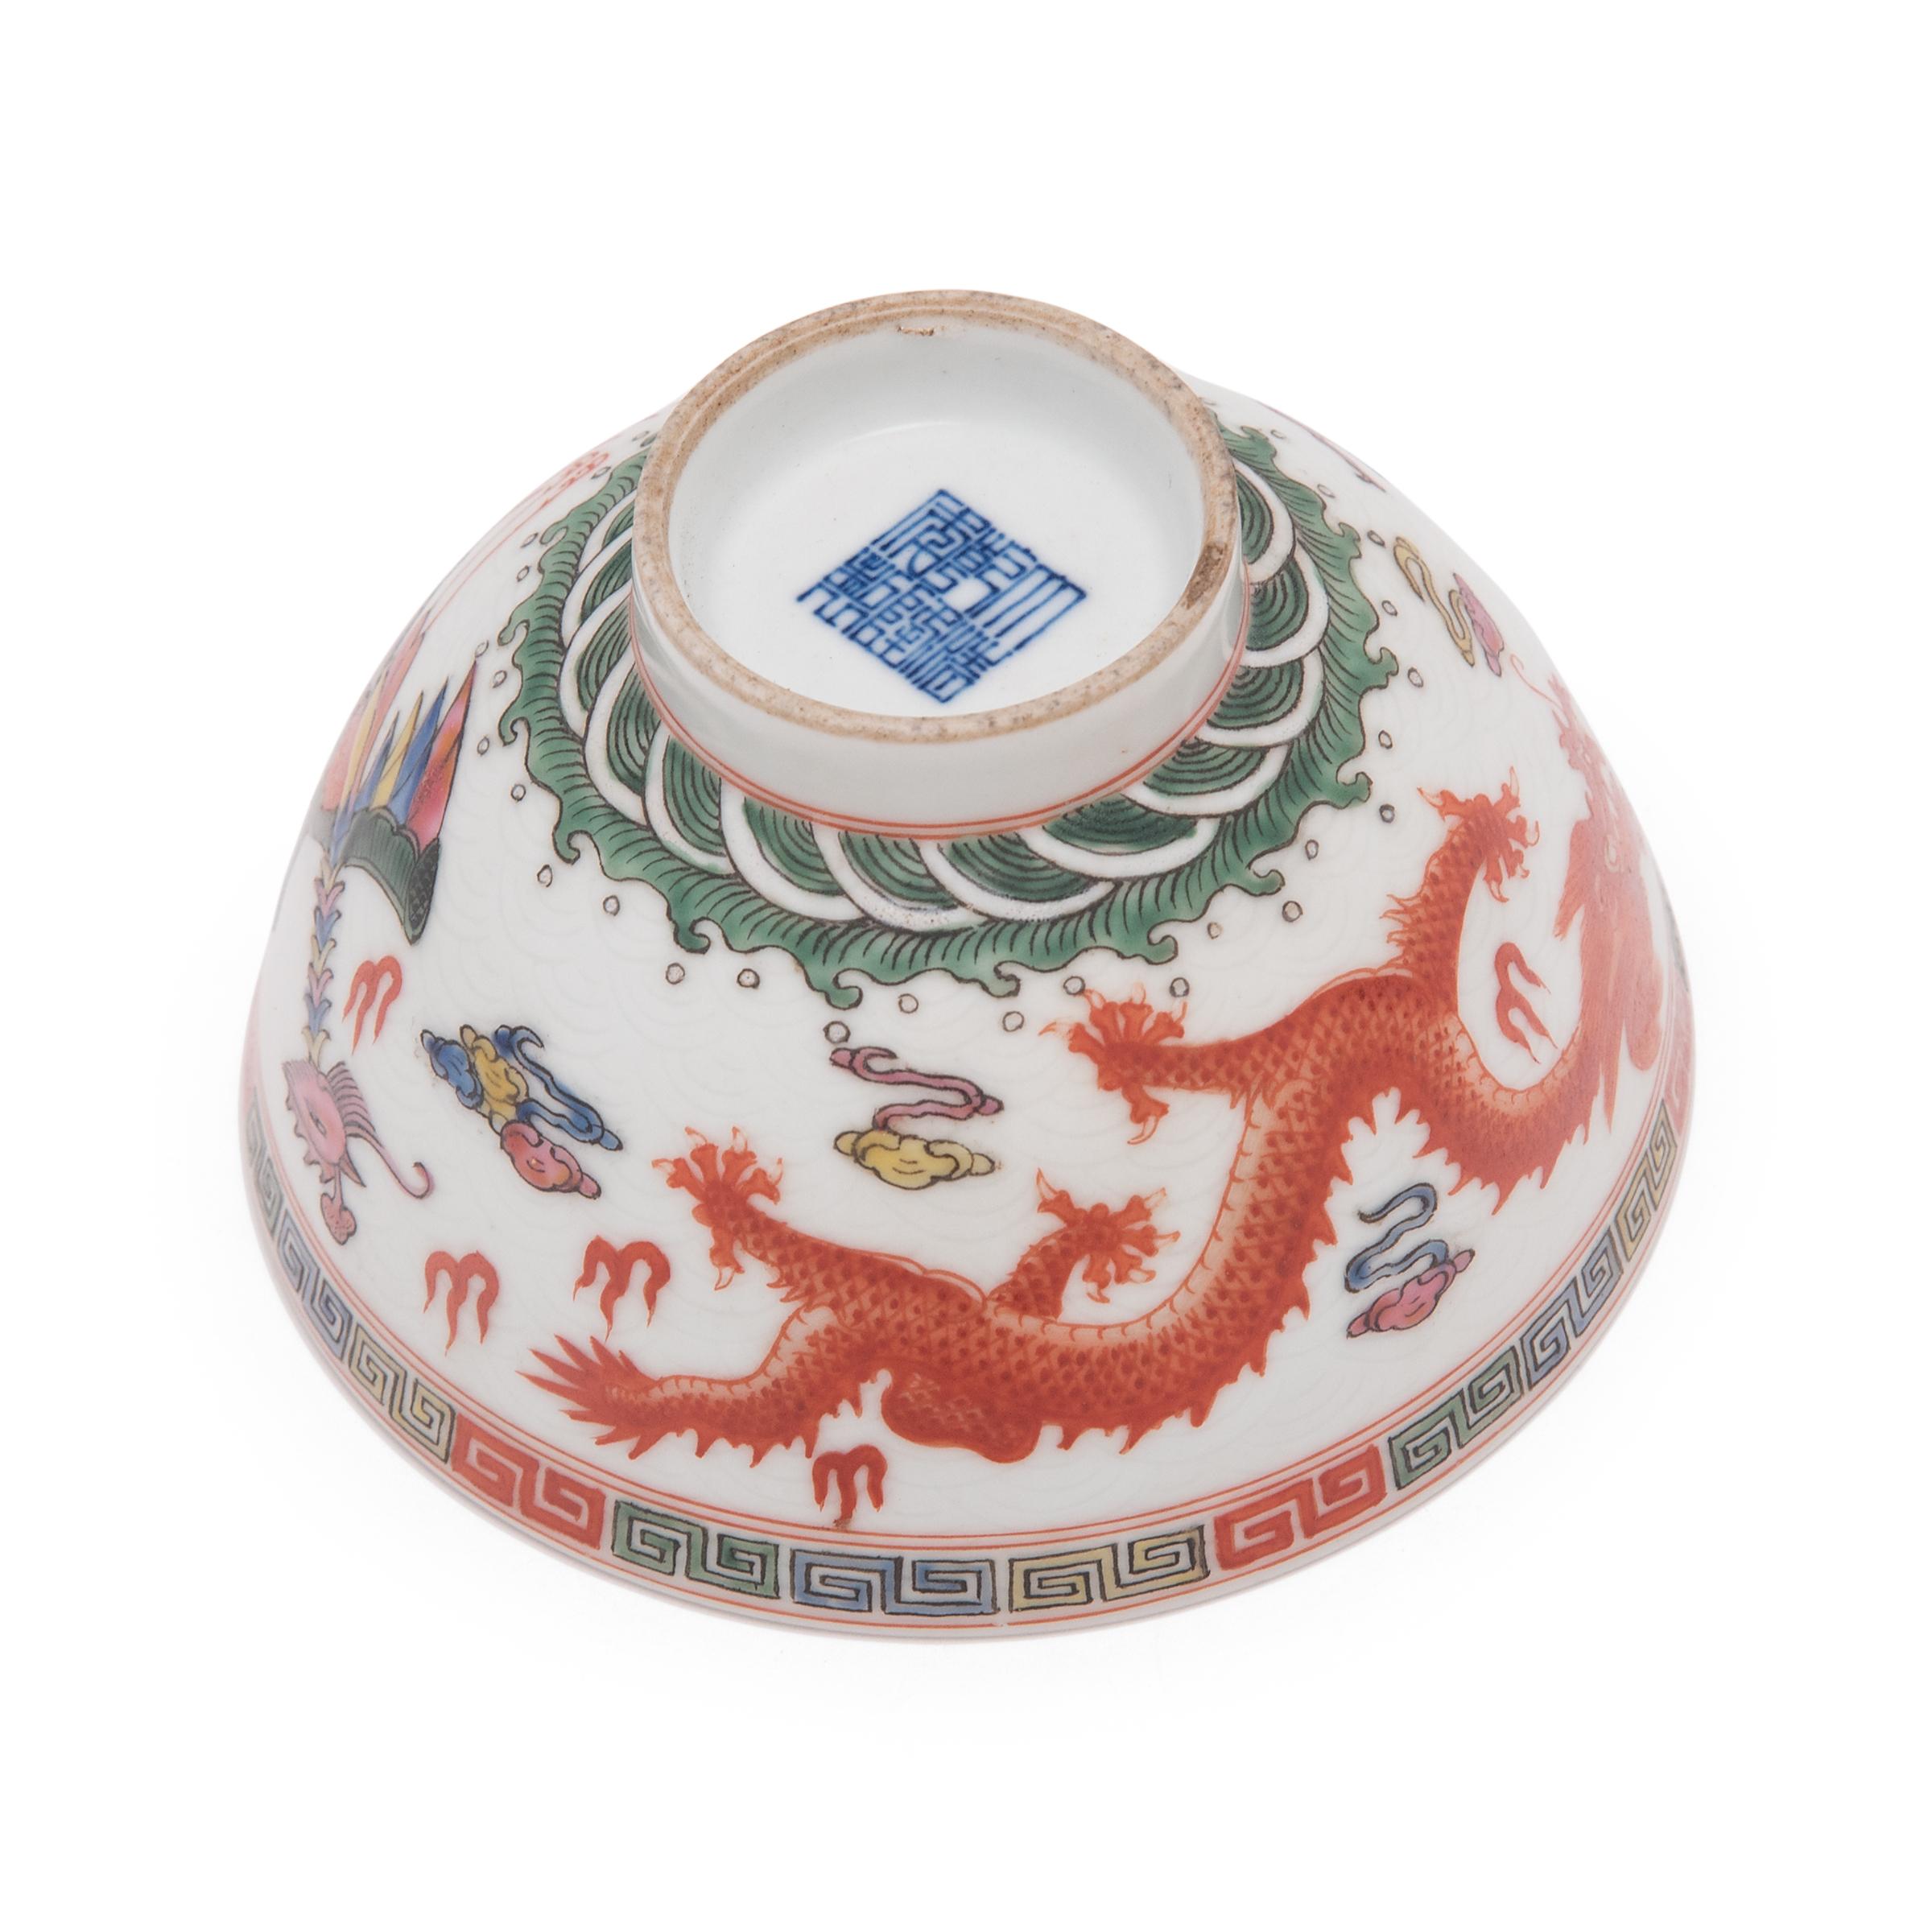 Enameled Chinese Dragon and Phoenix Yingcai Tea Cup, c. 1900